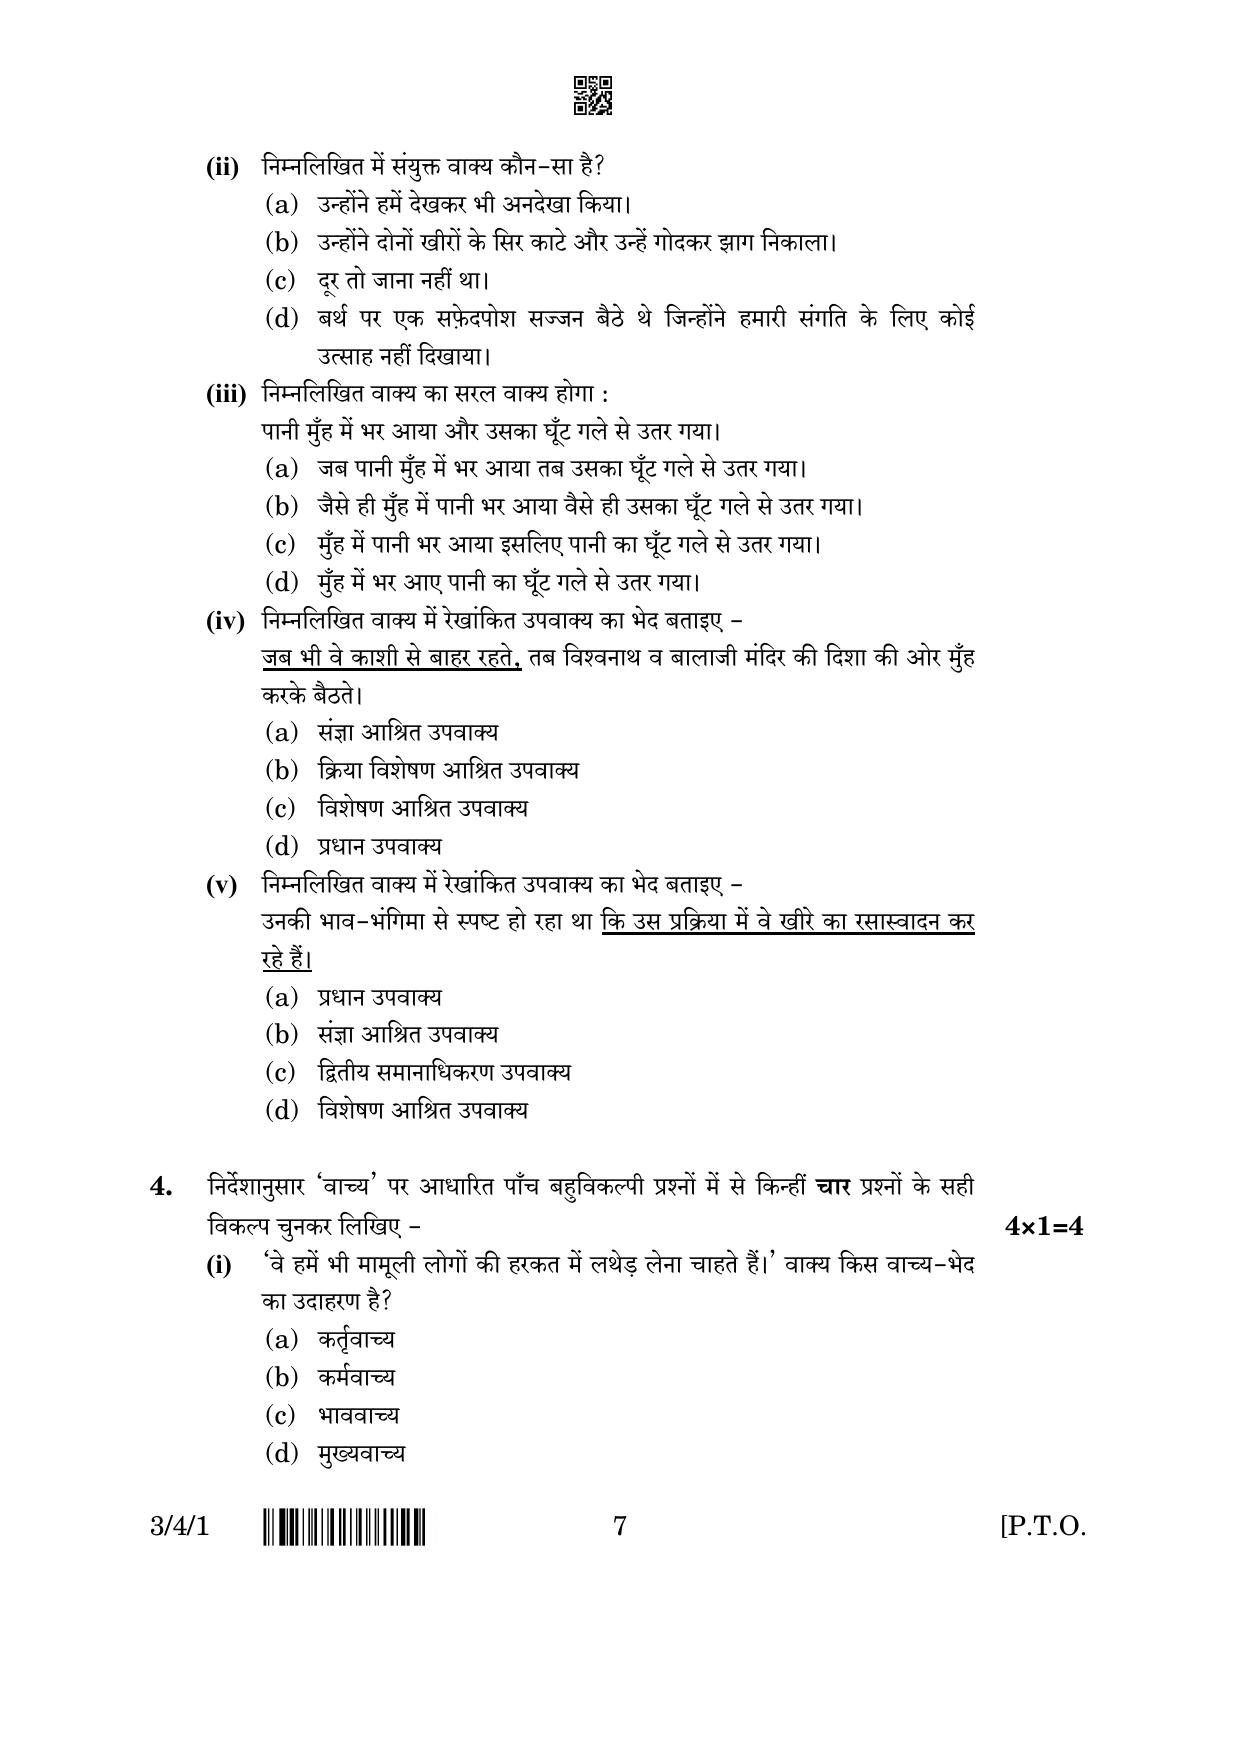 CBSE Class 10 3-4-1 Hindi A 2023 Question Paper - Page 7